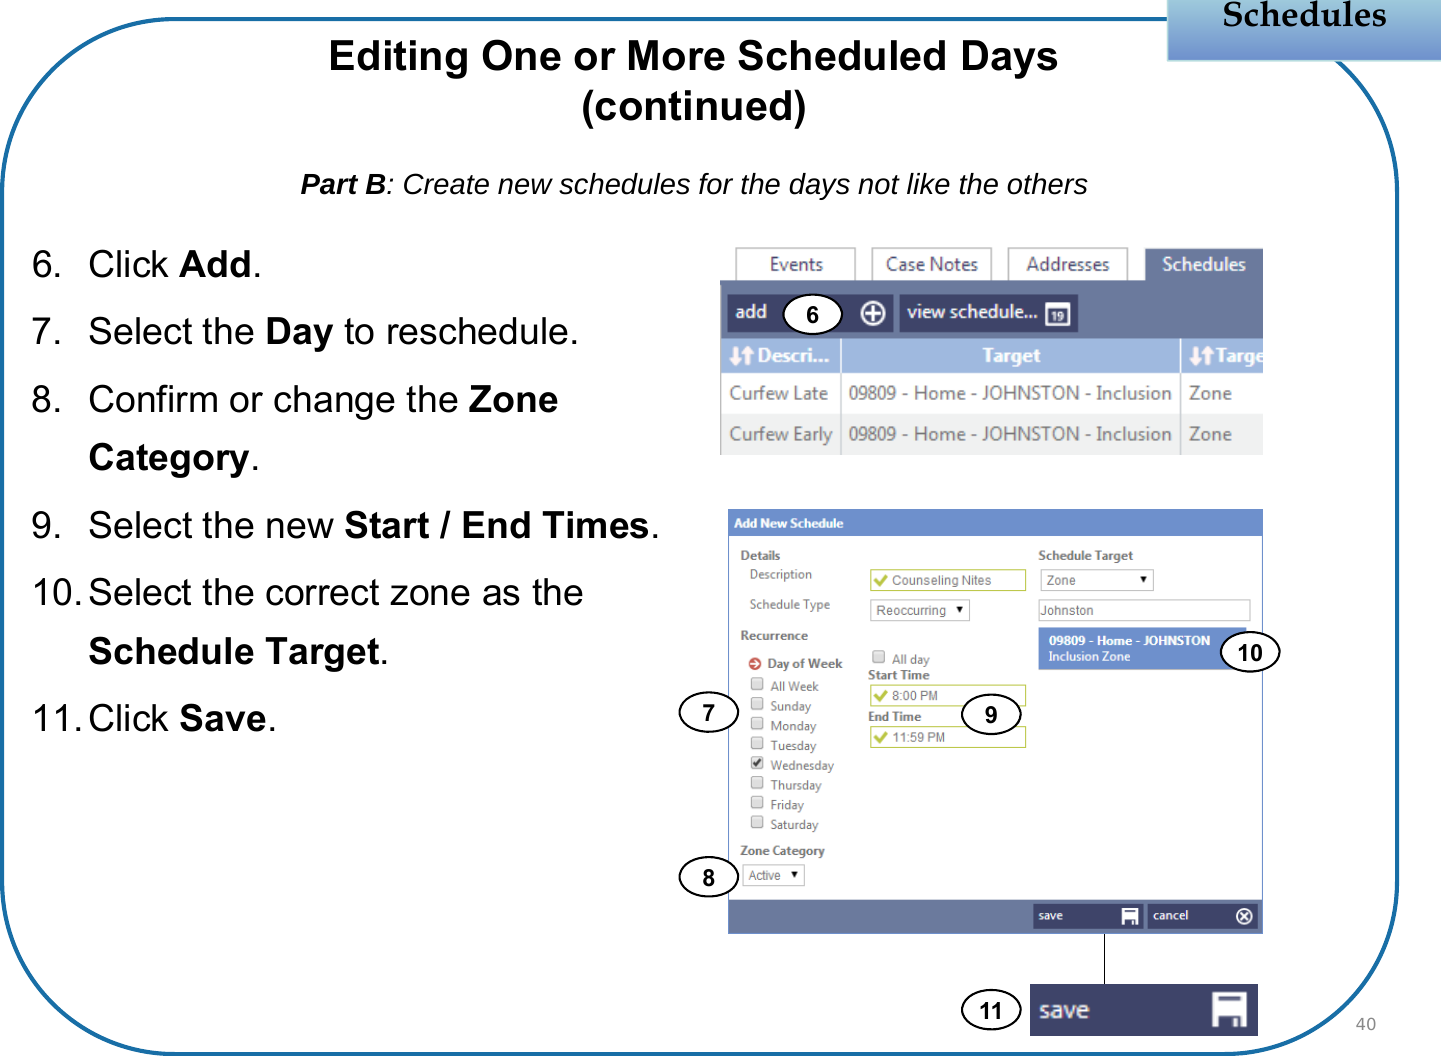 Schedules6. Click Add.7. Select the Day to reschedule.8. Confirm or change the Zone Category.9. Select the new Start / End Times.10.Select the correct zone as the Schedule Target.11.Click Save.40Editing One or More Scheduled Days(continued)Part B: Create new schedules for the days not like the others69871011